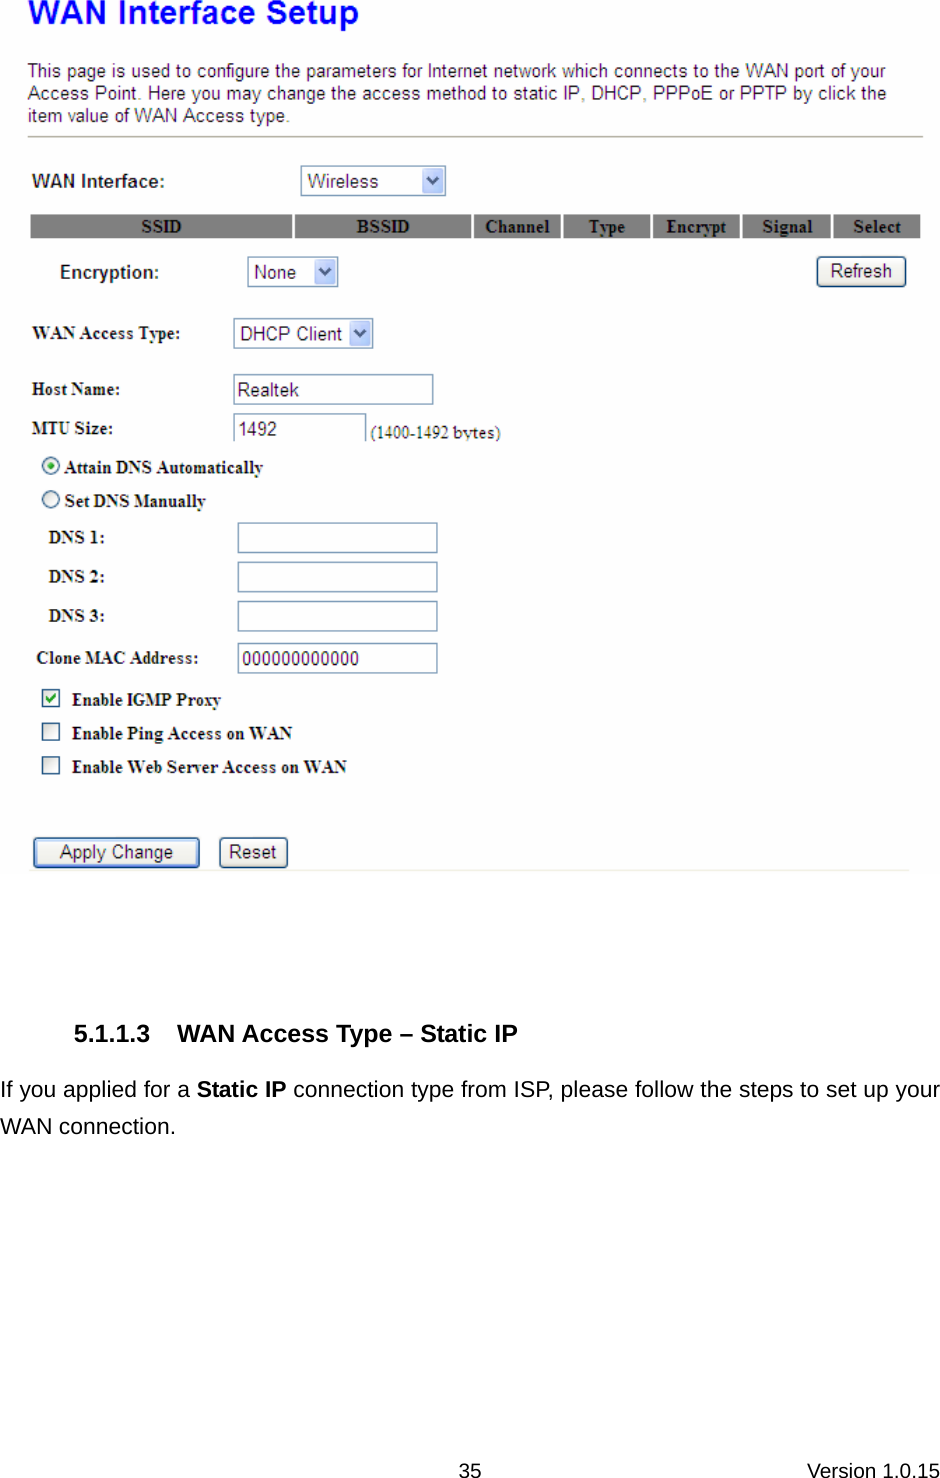 Version 1.0.15 35  5.1.1.3  WAN Access Type – Static IP If you applied for a Static IP connection type from ISP, please follow the steps to set up your WAN connection. 